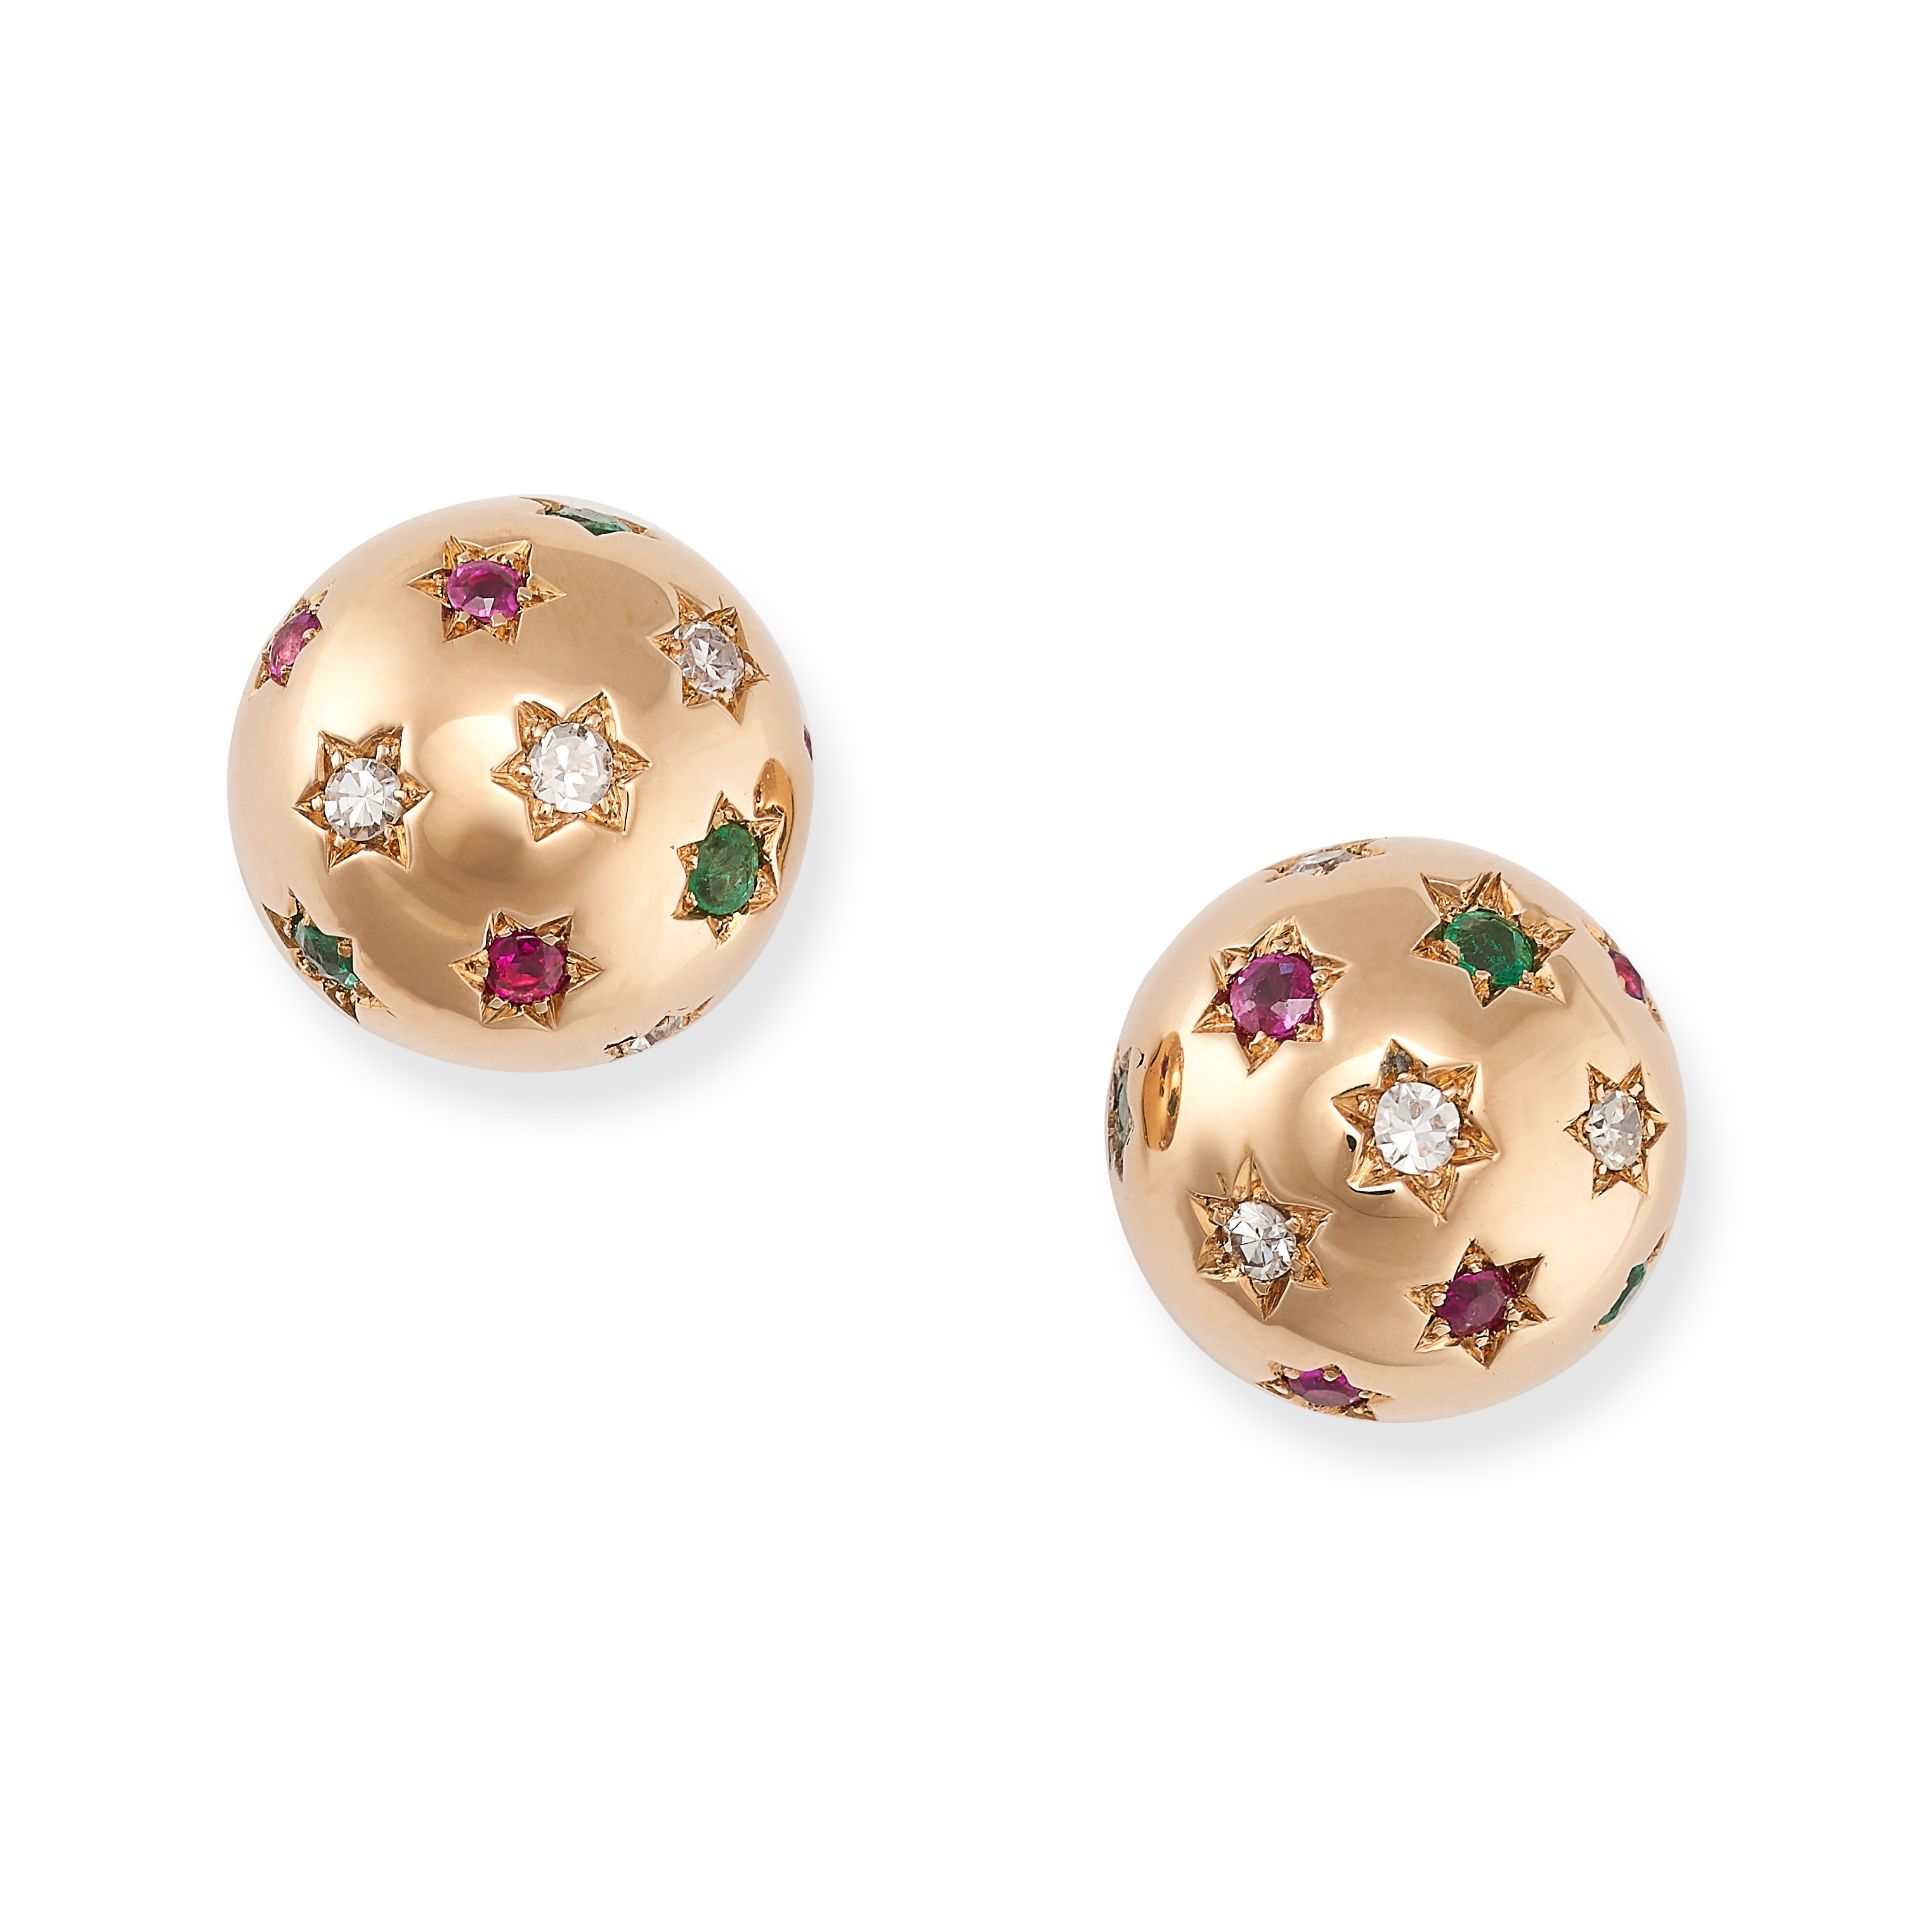 A PAIR OF VINTAGE RUBY, EMERALD AND DIAMOND EARRINGS in 18ct yellow gold, the domed faces set wit...